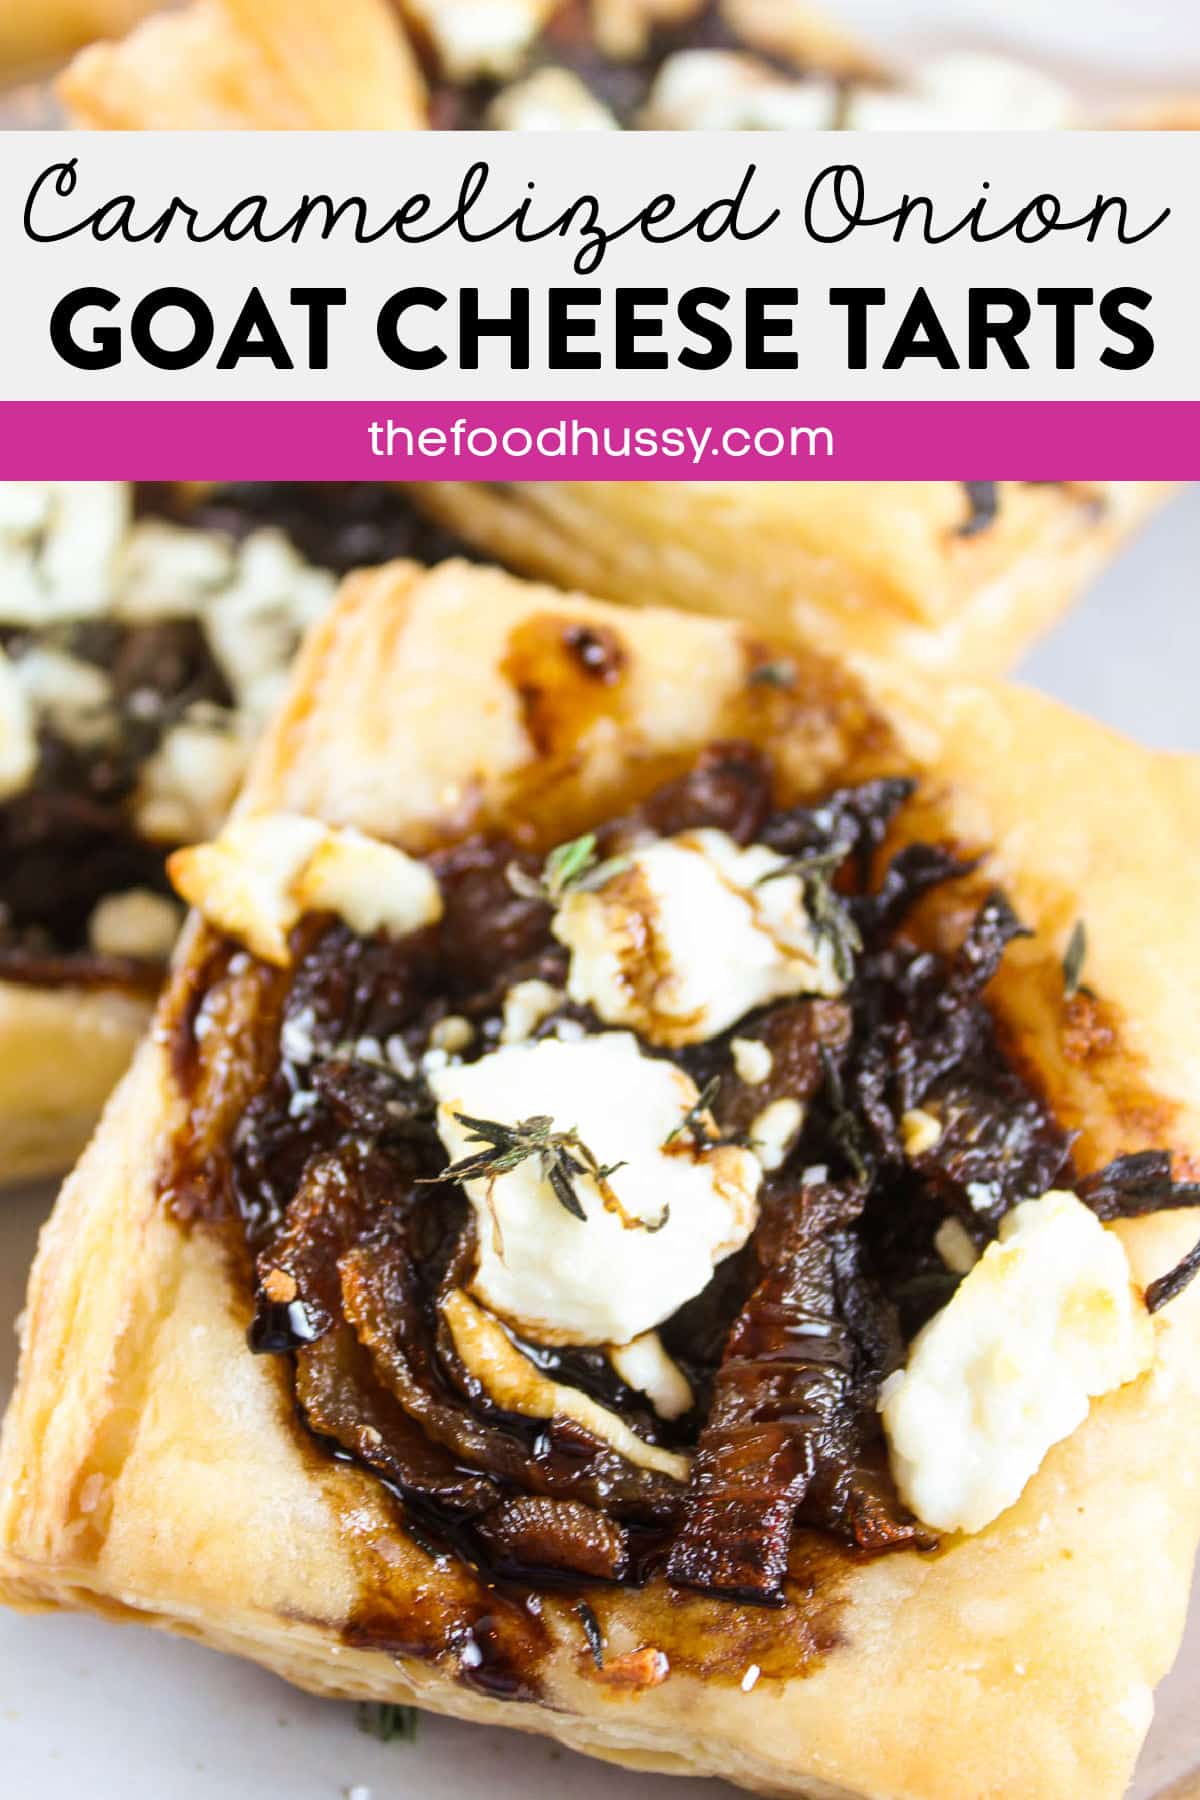 These Caramelized Onion & Goat Cheese Tartlets will be the most popular dish at your next brunch! They're beautiful, light, crispy, creamy and delicious!  via @foodhussy